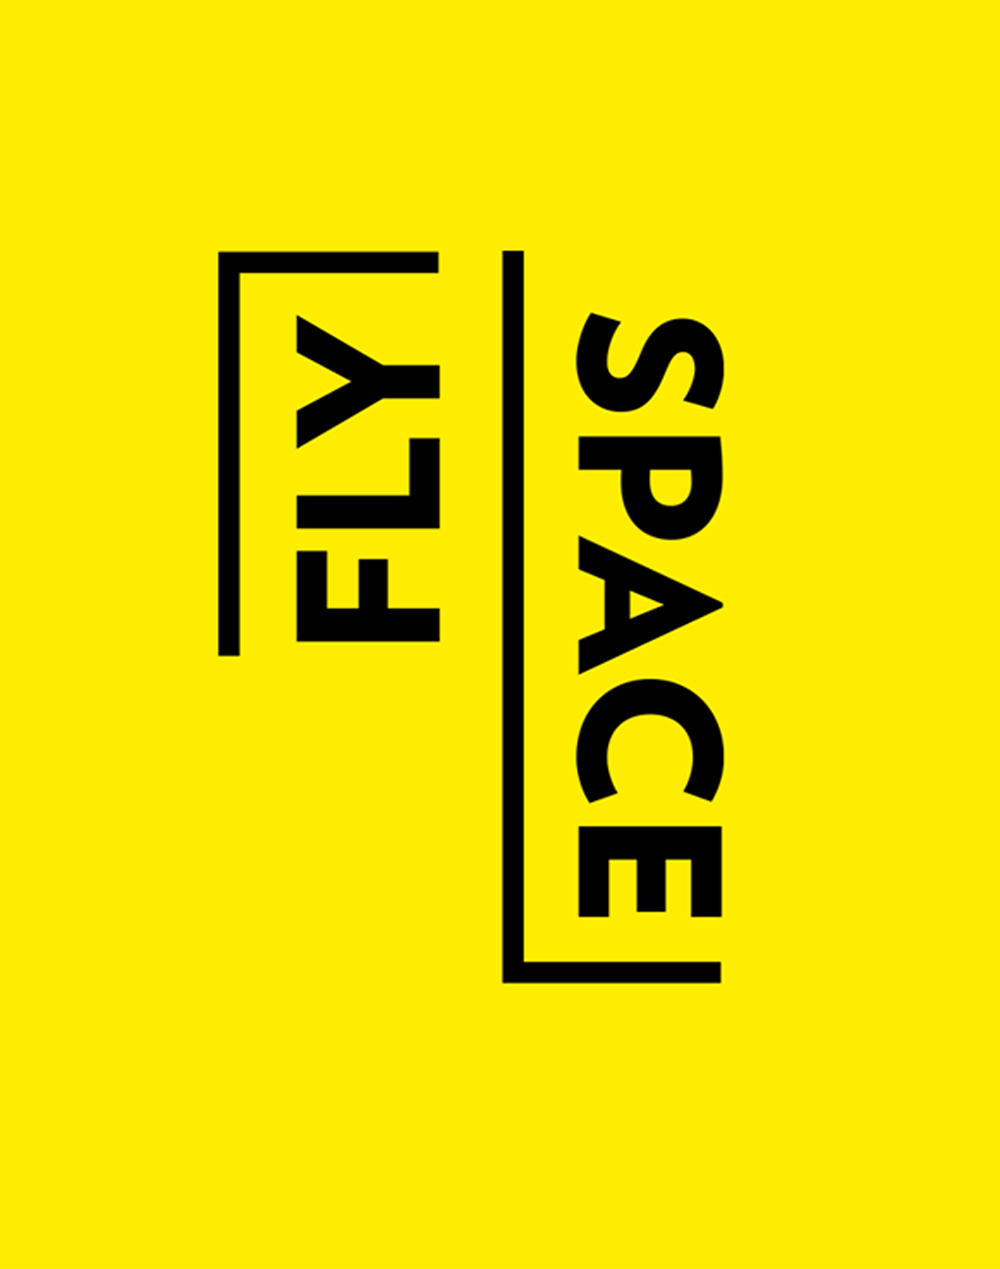 Fly Space